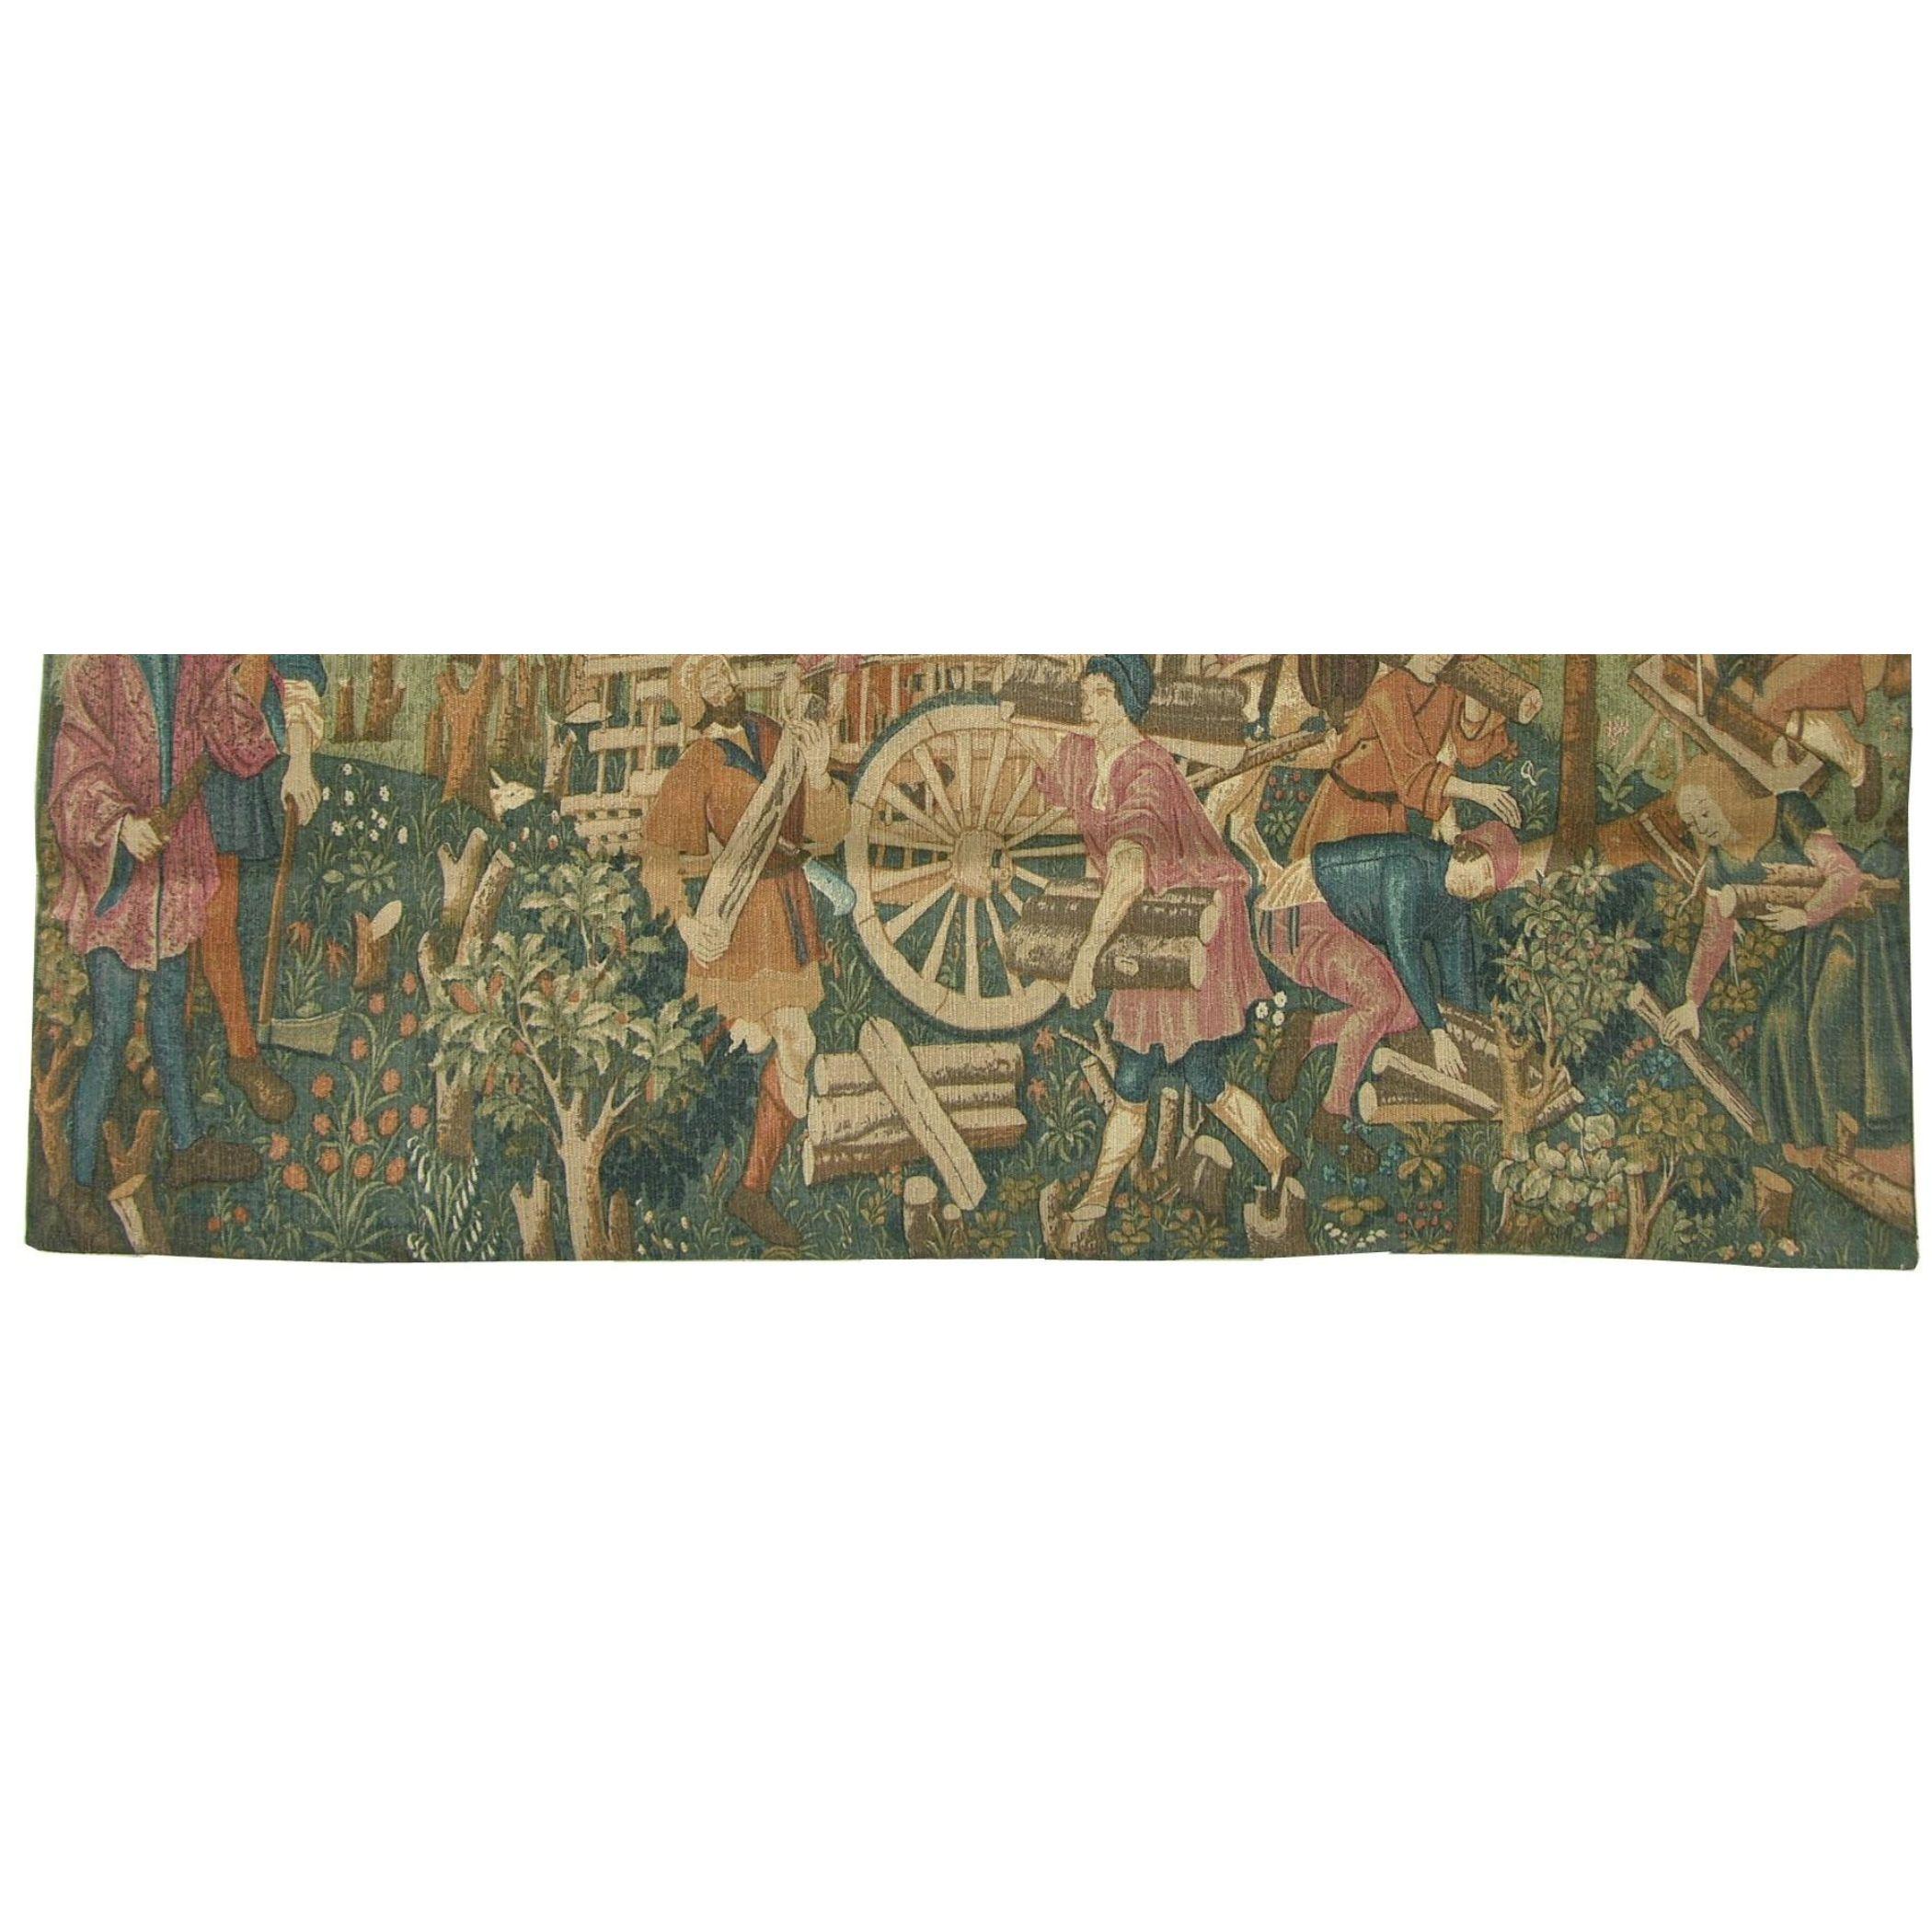 Other Antique Printed Egyptian 1920 Tapestry 3'6 X 5'3